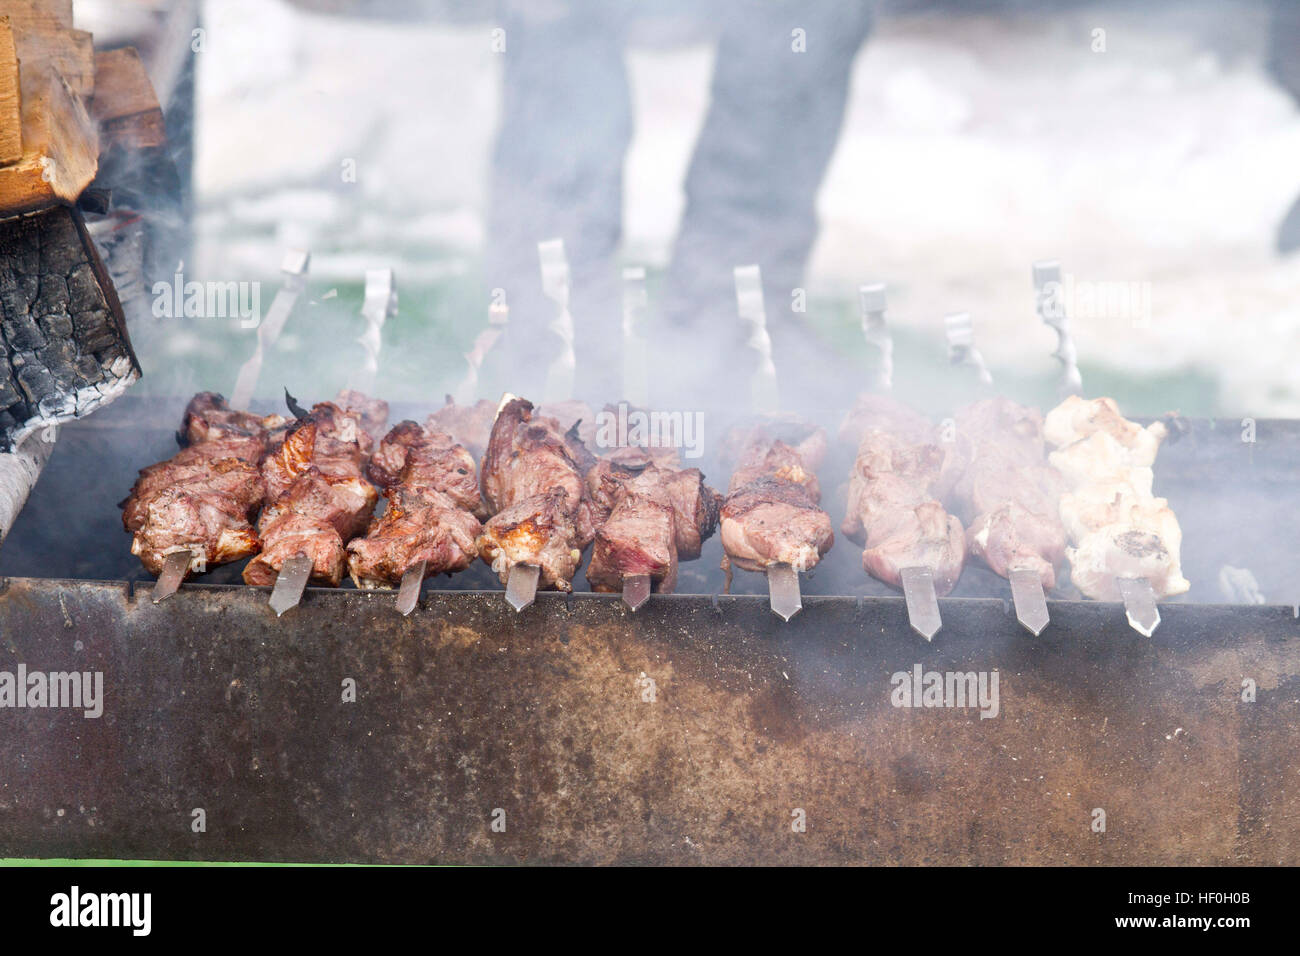 Nov 3, 2016 - The Kabardino-Balkar Republic, Russia - Traditional Russian  BBQ, Shashlik (meaning skewered meat) was originally made of lamb. Nowadays  It is also made of pork or beef depending on